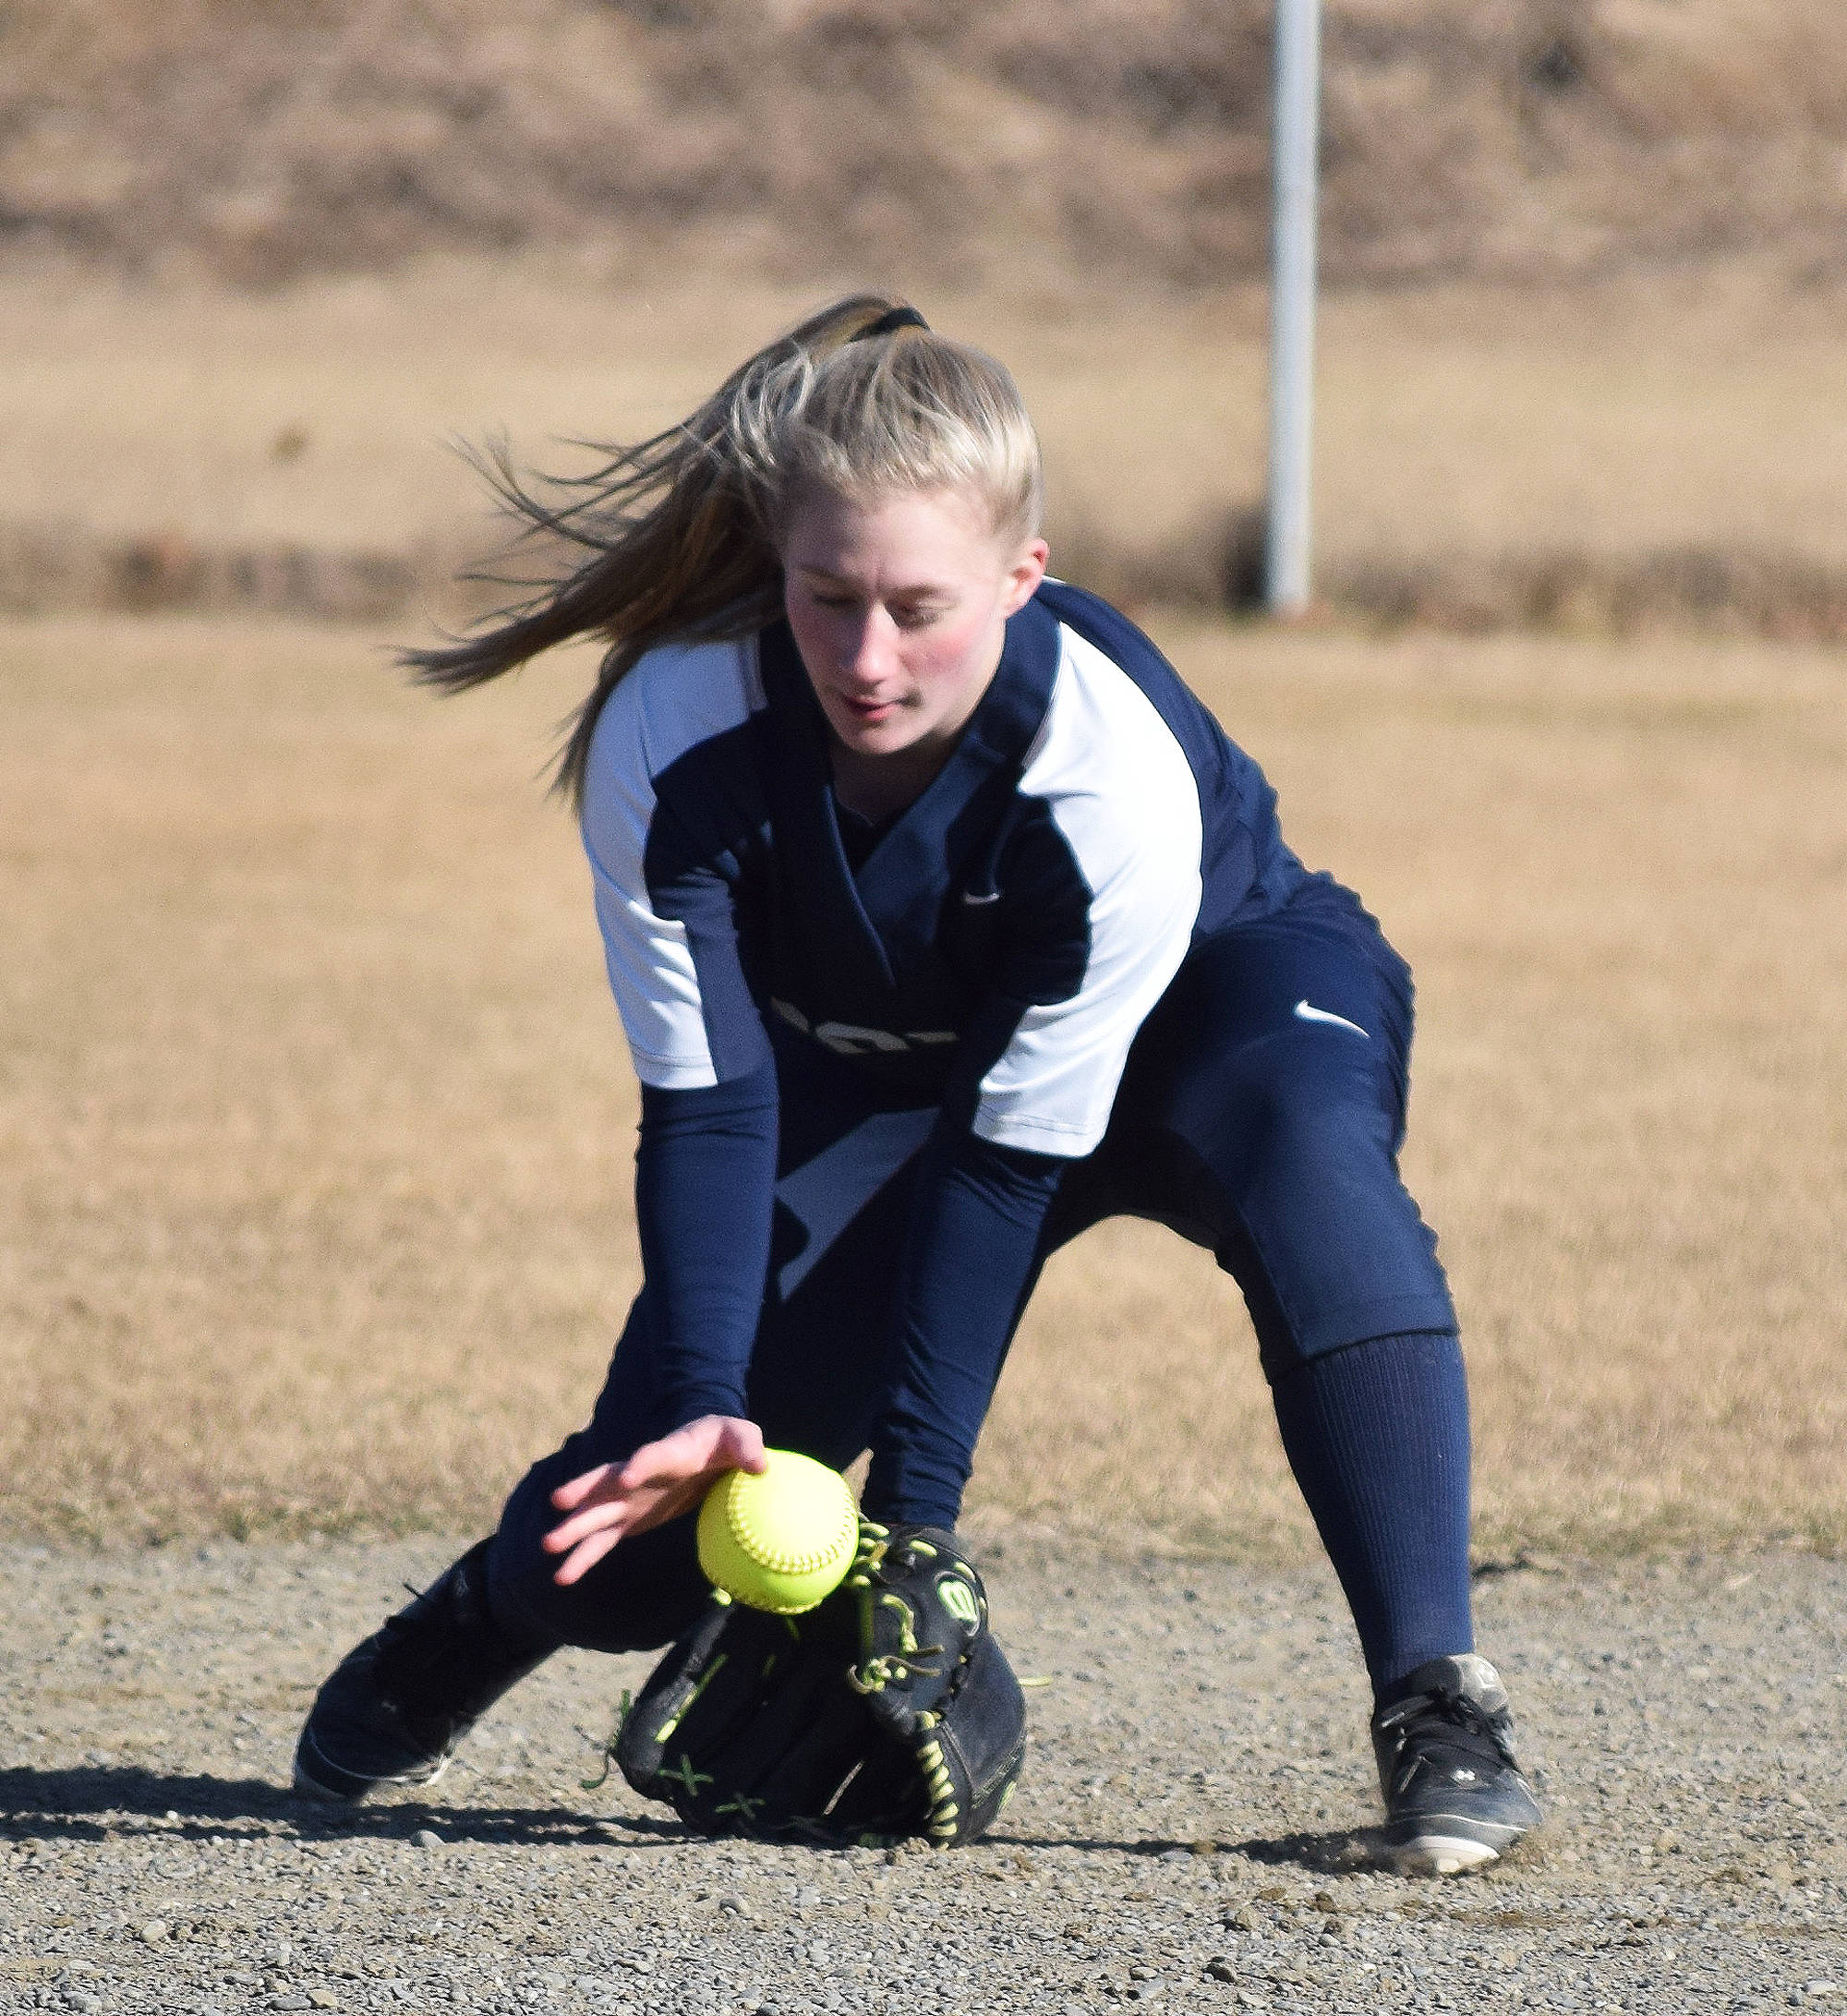 Soldotna shortstop Ashley McDonald scoops up a groundball from a Homer batter May 1, 2018, at the Soldotna Little League fields. (Photo by Joey Klecka/Peninsula Clarion)